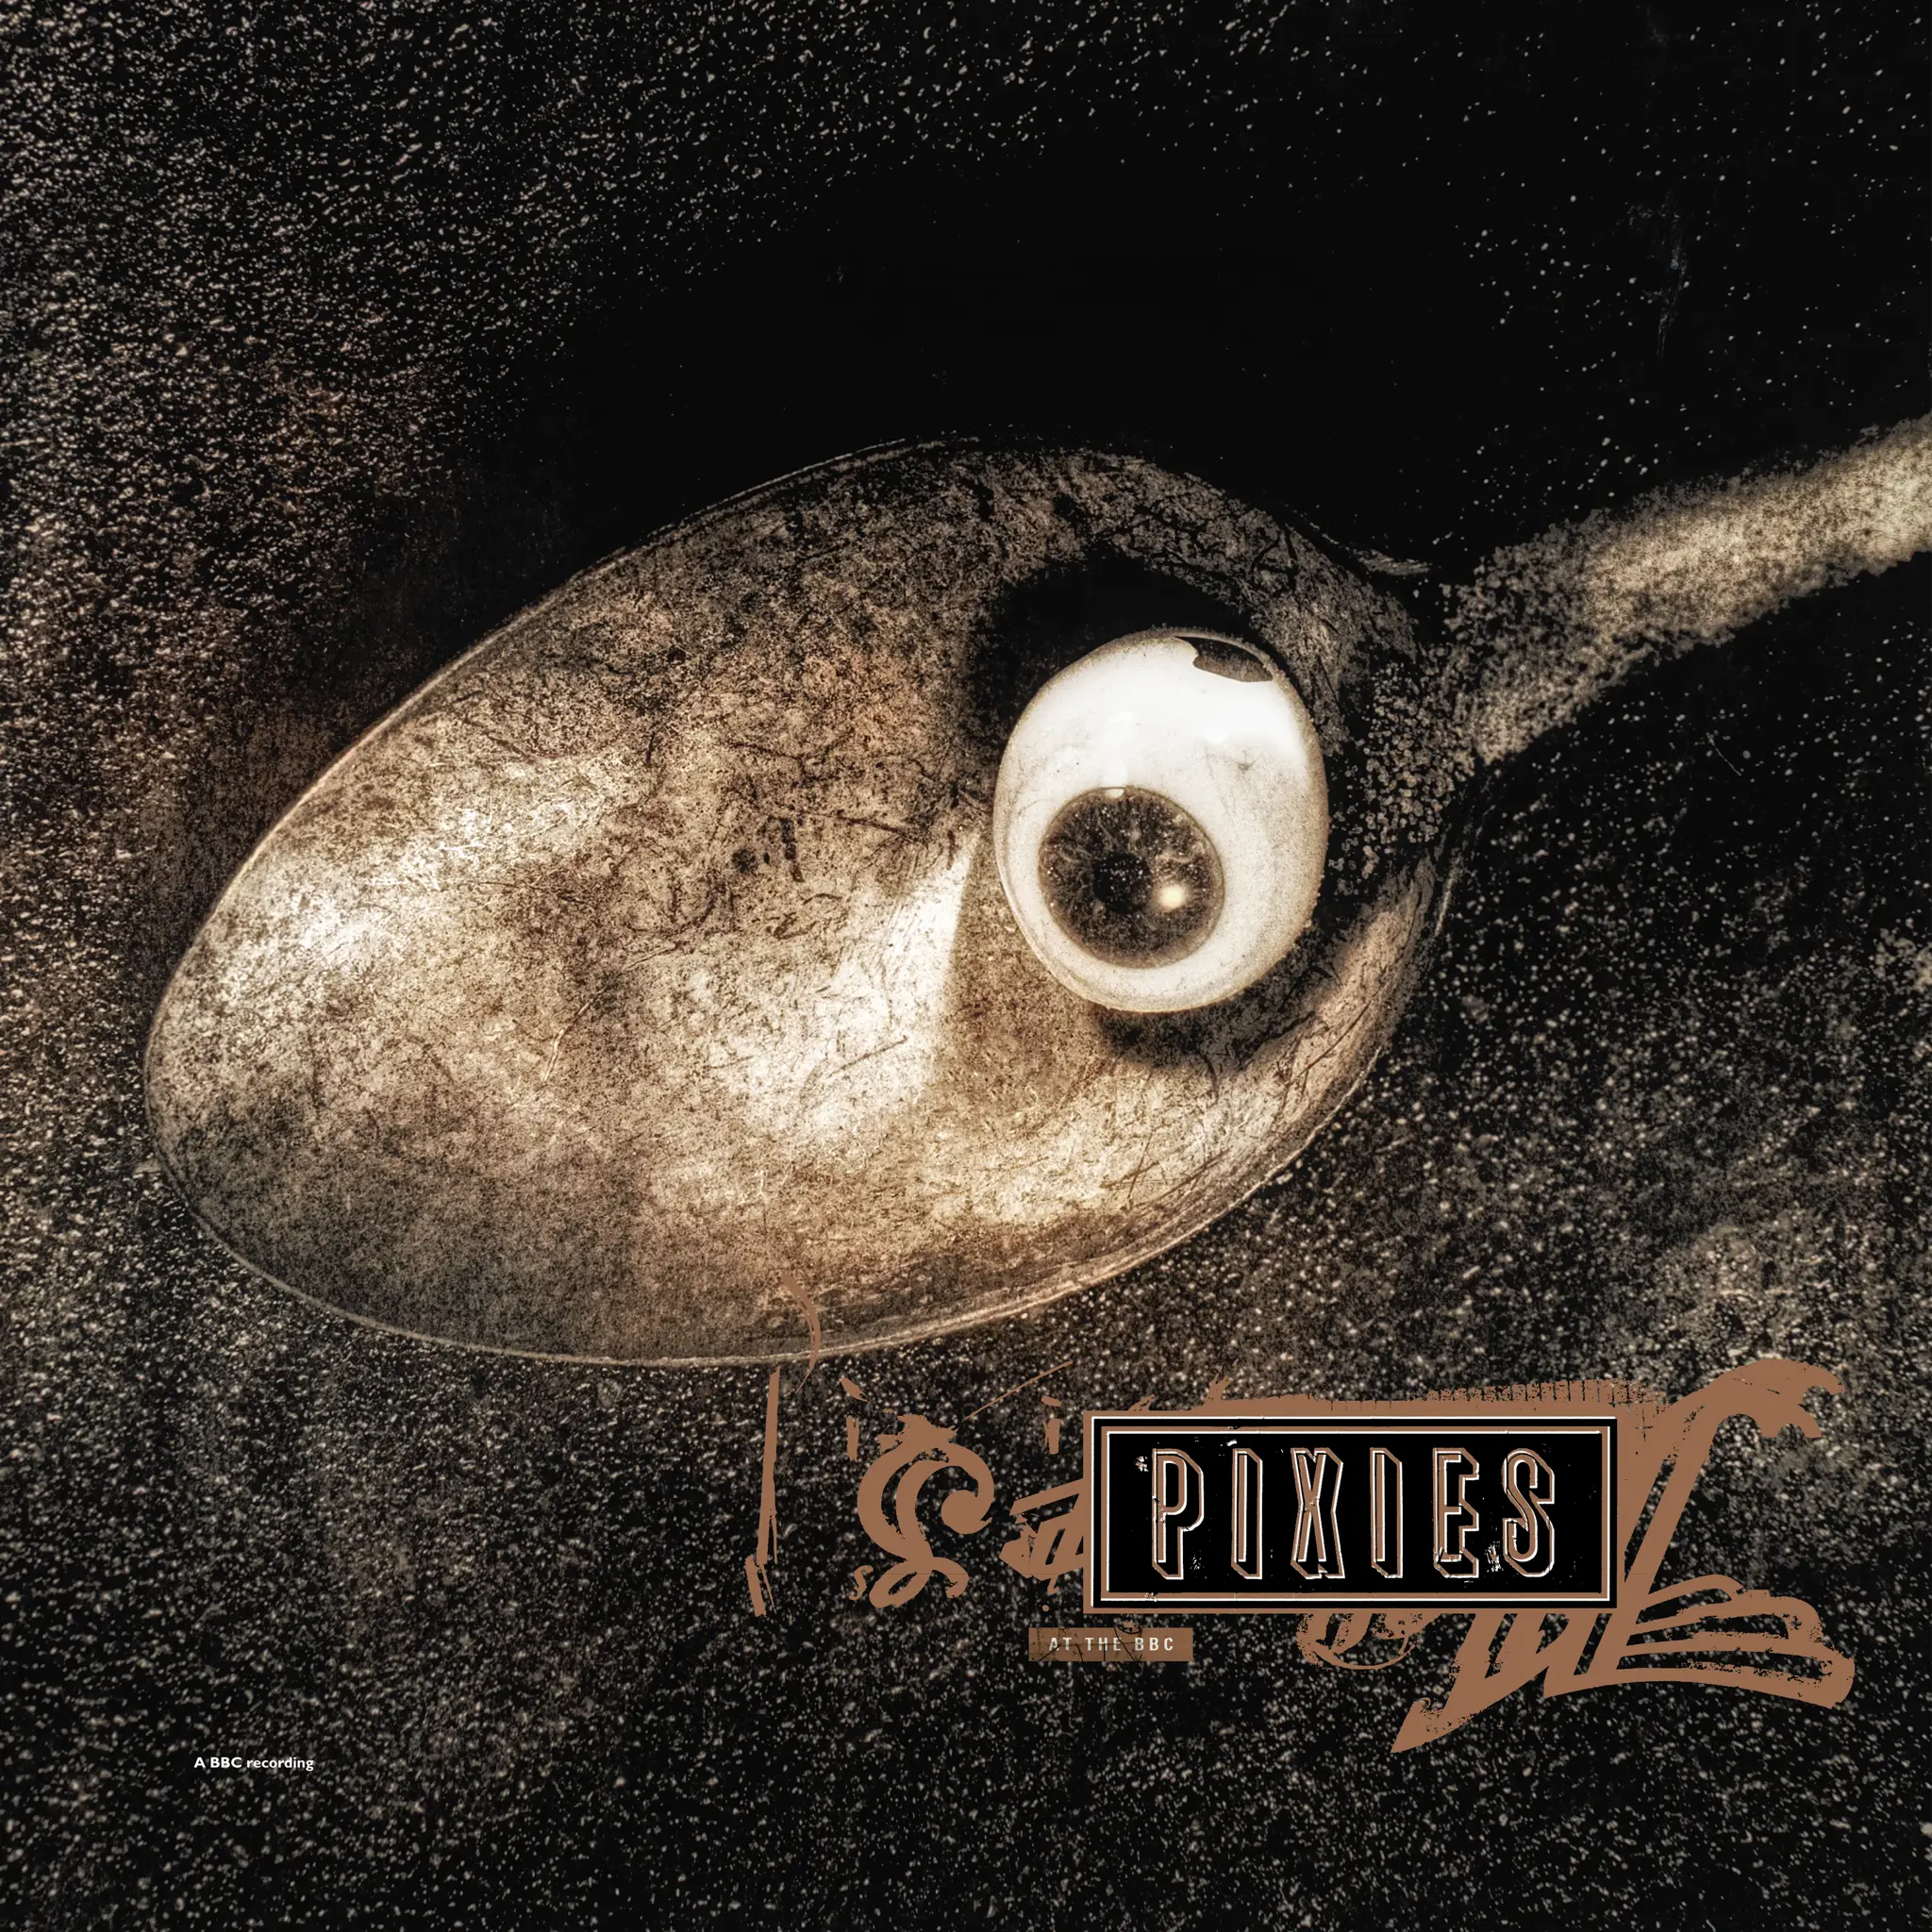 <strong>Pixies - Live At The BBC</strong> (Vinyl LP - black)